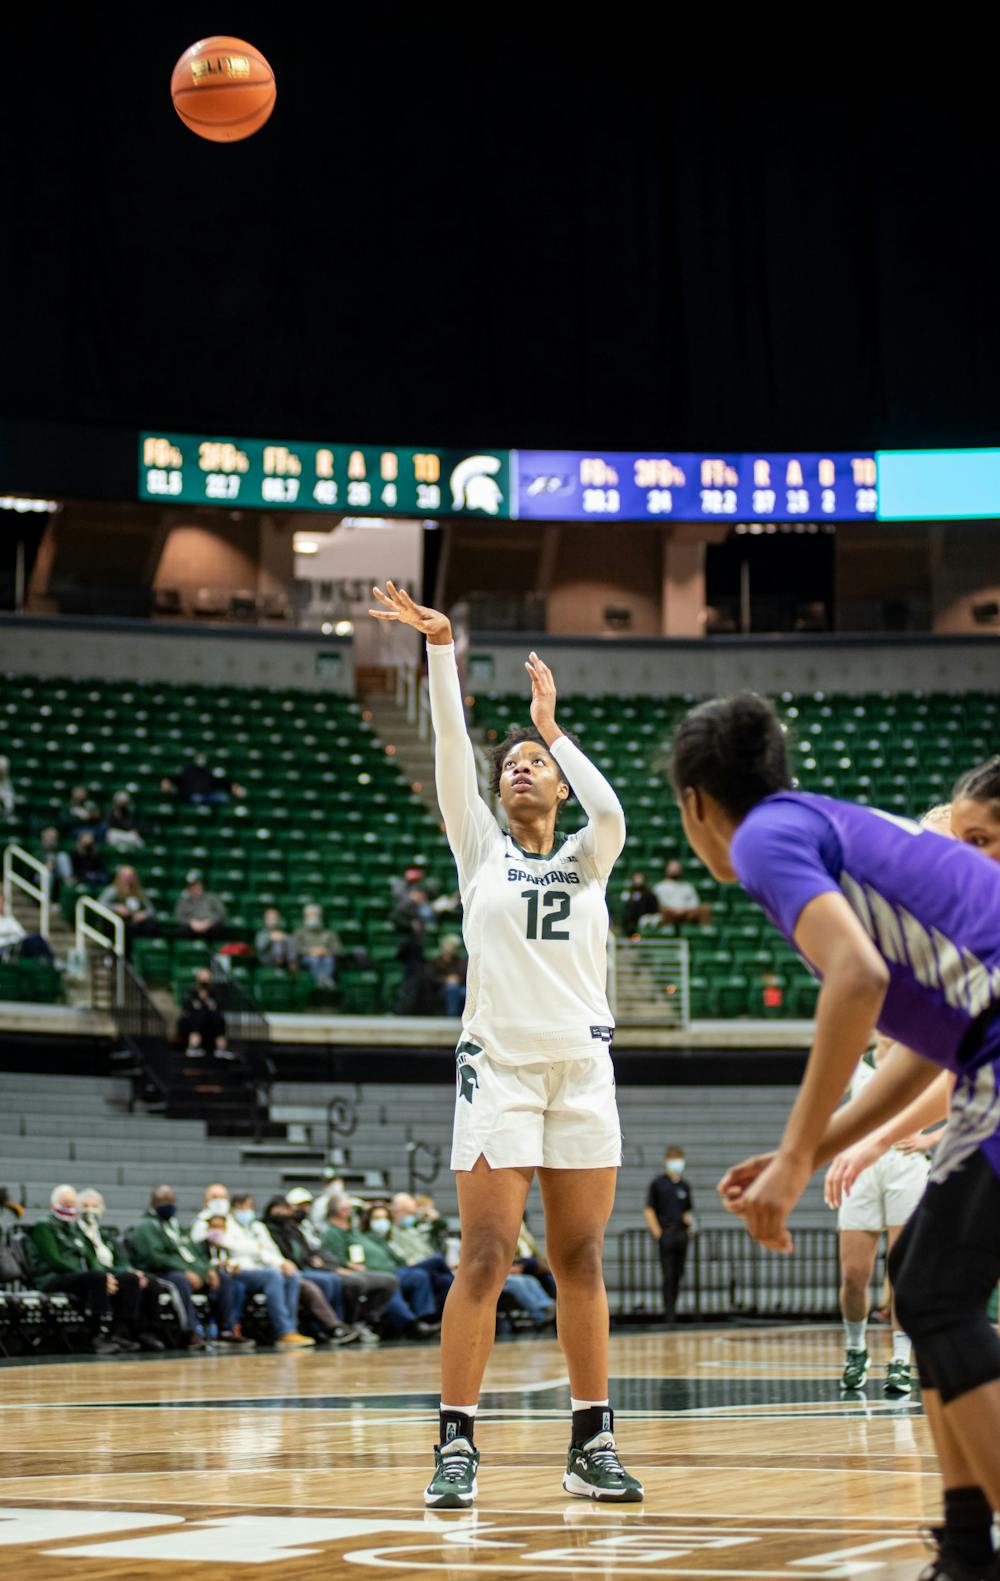 Freshman Isaline Alexander (12) shoots a freethrow during Michigan State's victory over the Niagara Purple Eagles on Nov. 14, 2021.